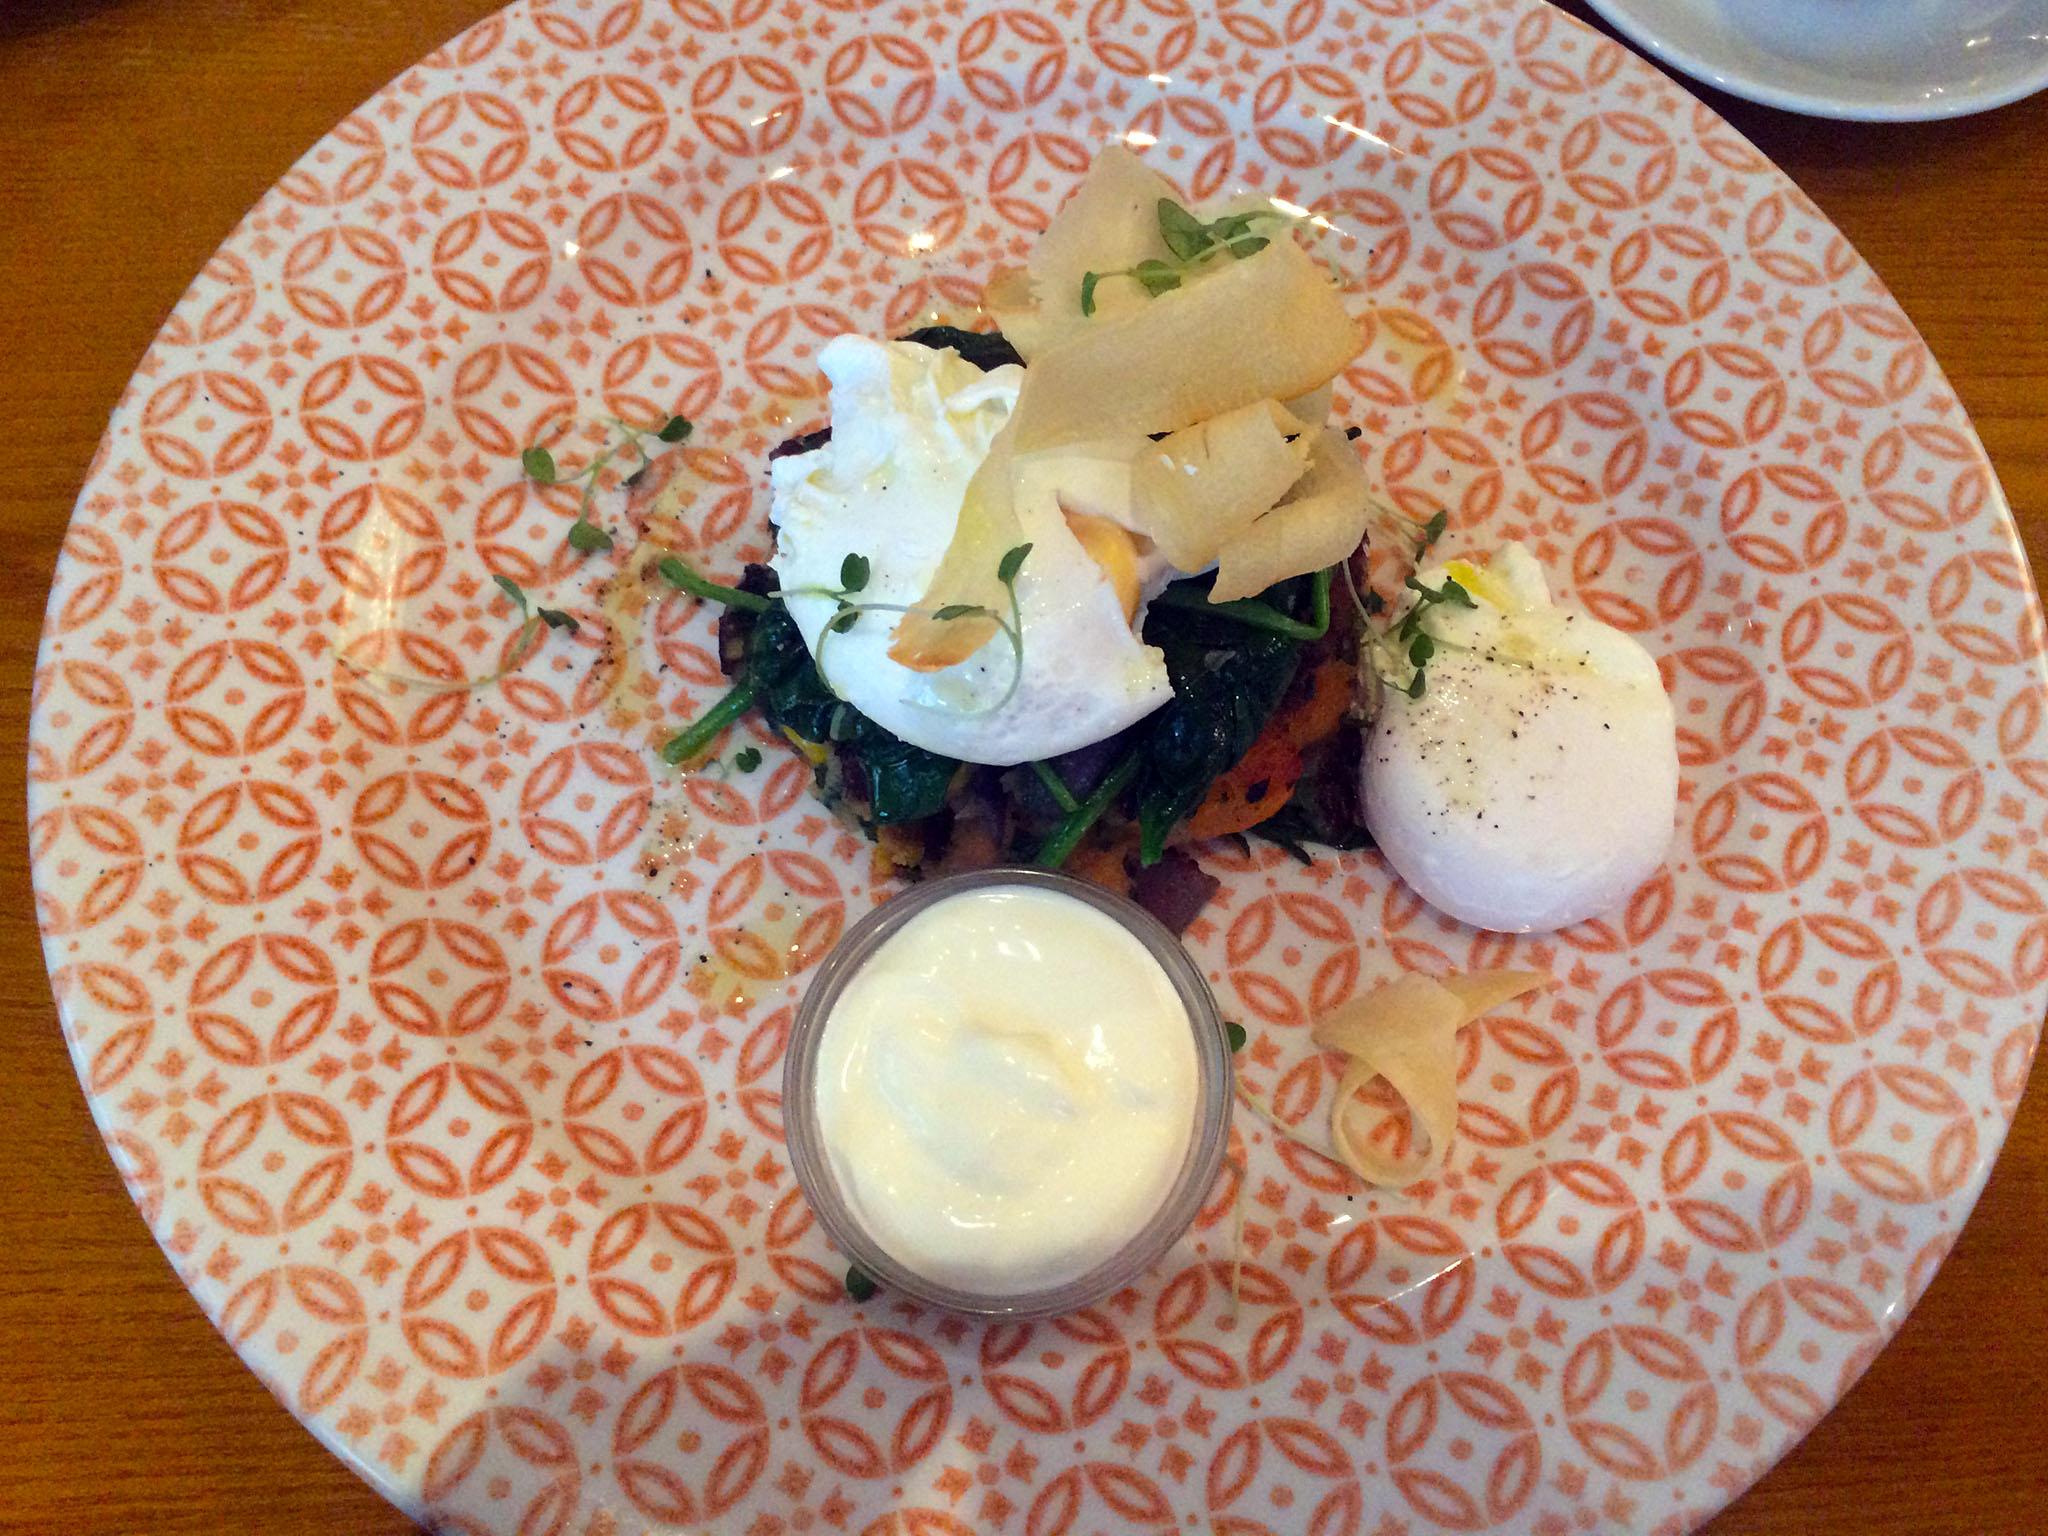 The sweet potato hash and poached eggs served with a dollop of crème fra?che is filling and flavourful